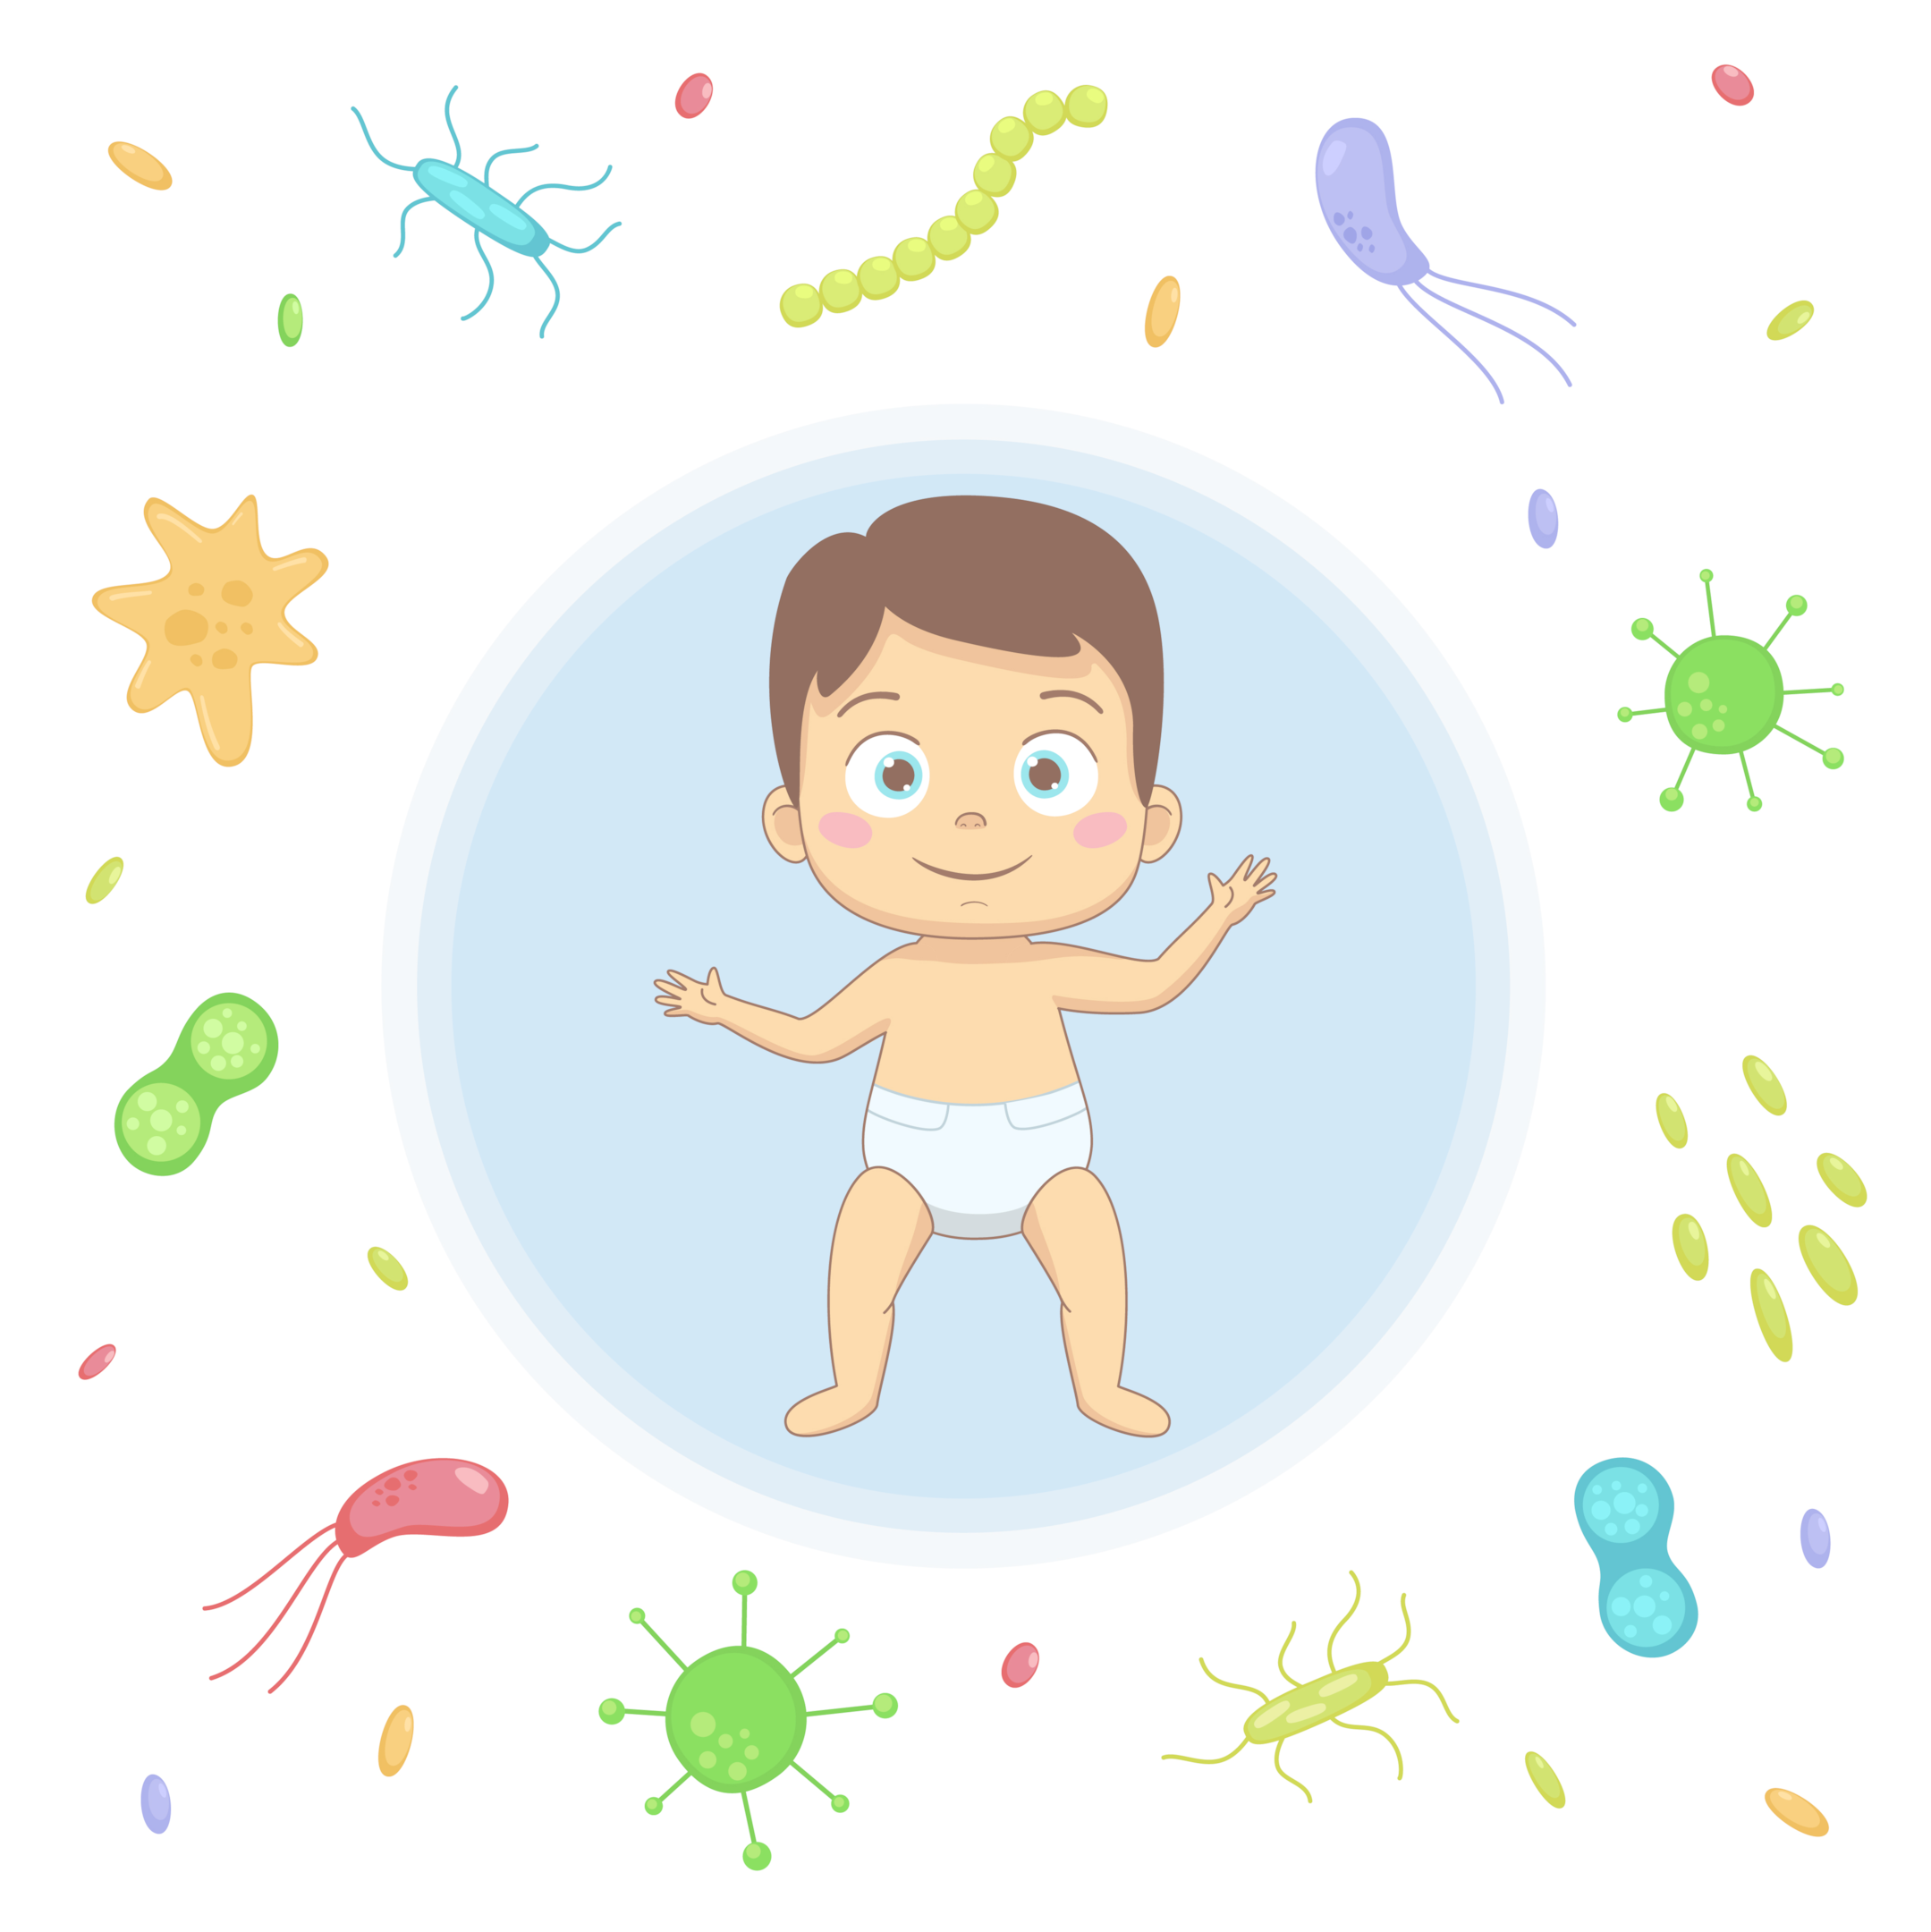 By the first birthday, the first line of defence against germs has adequately developed.